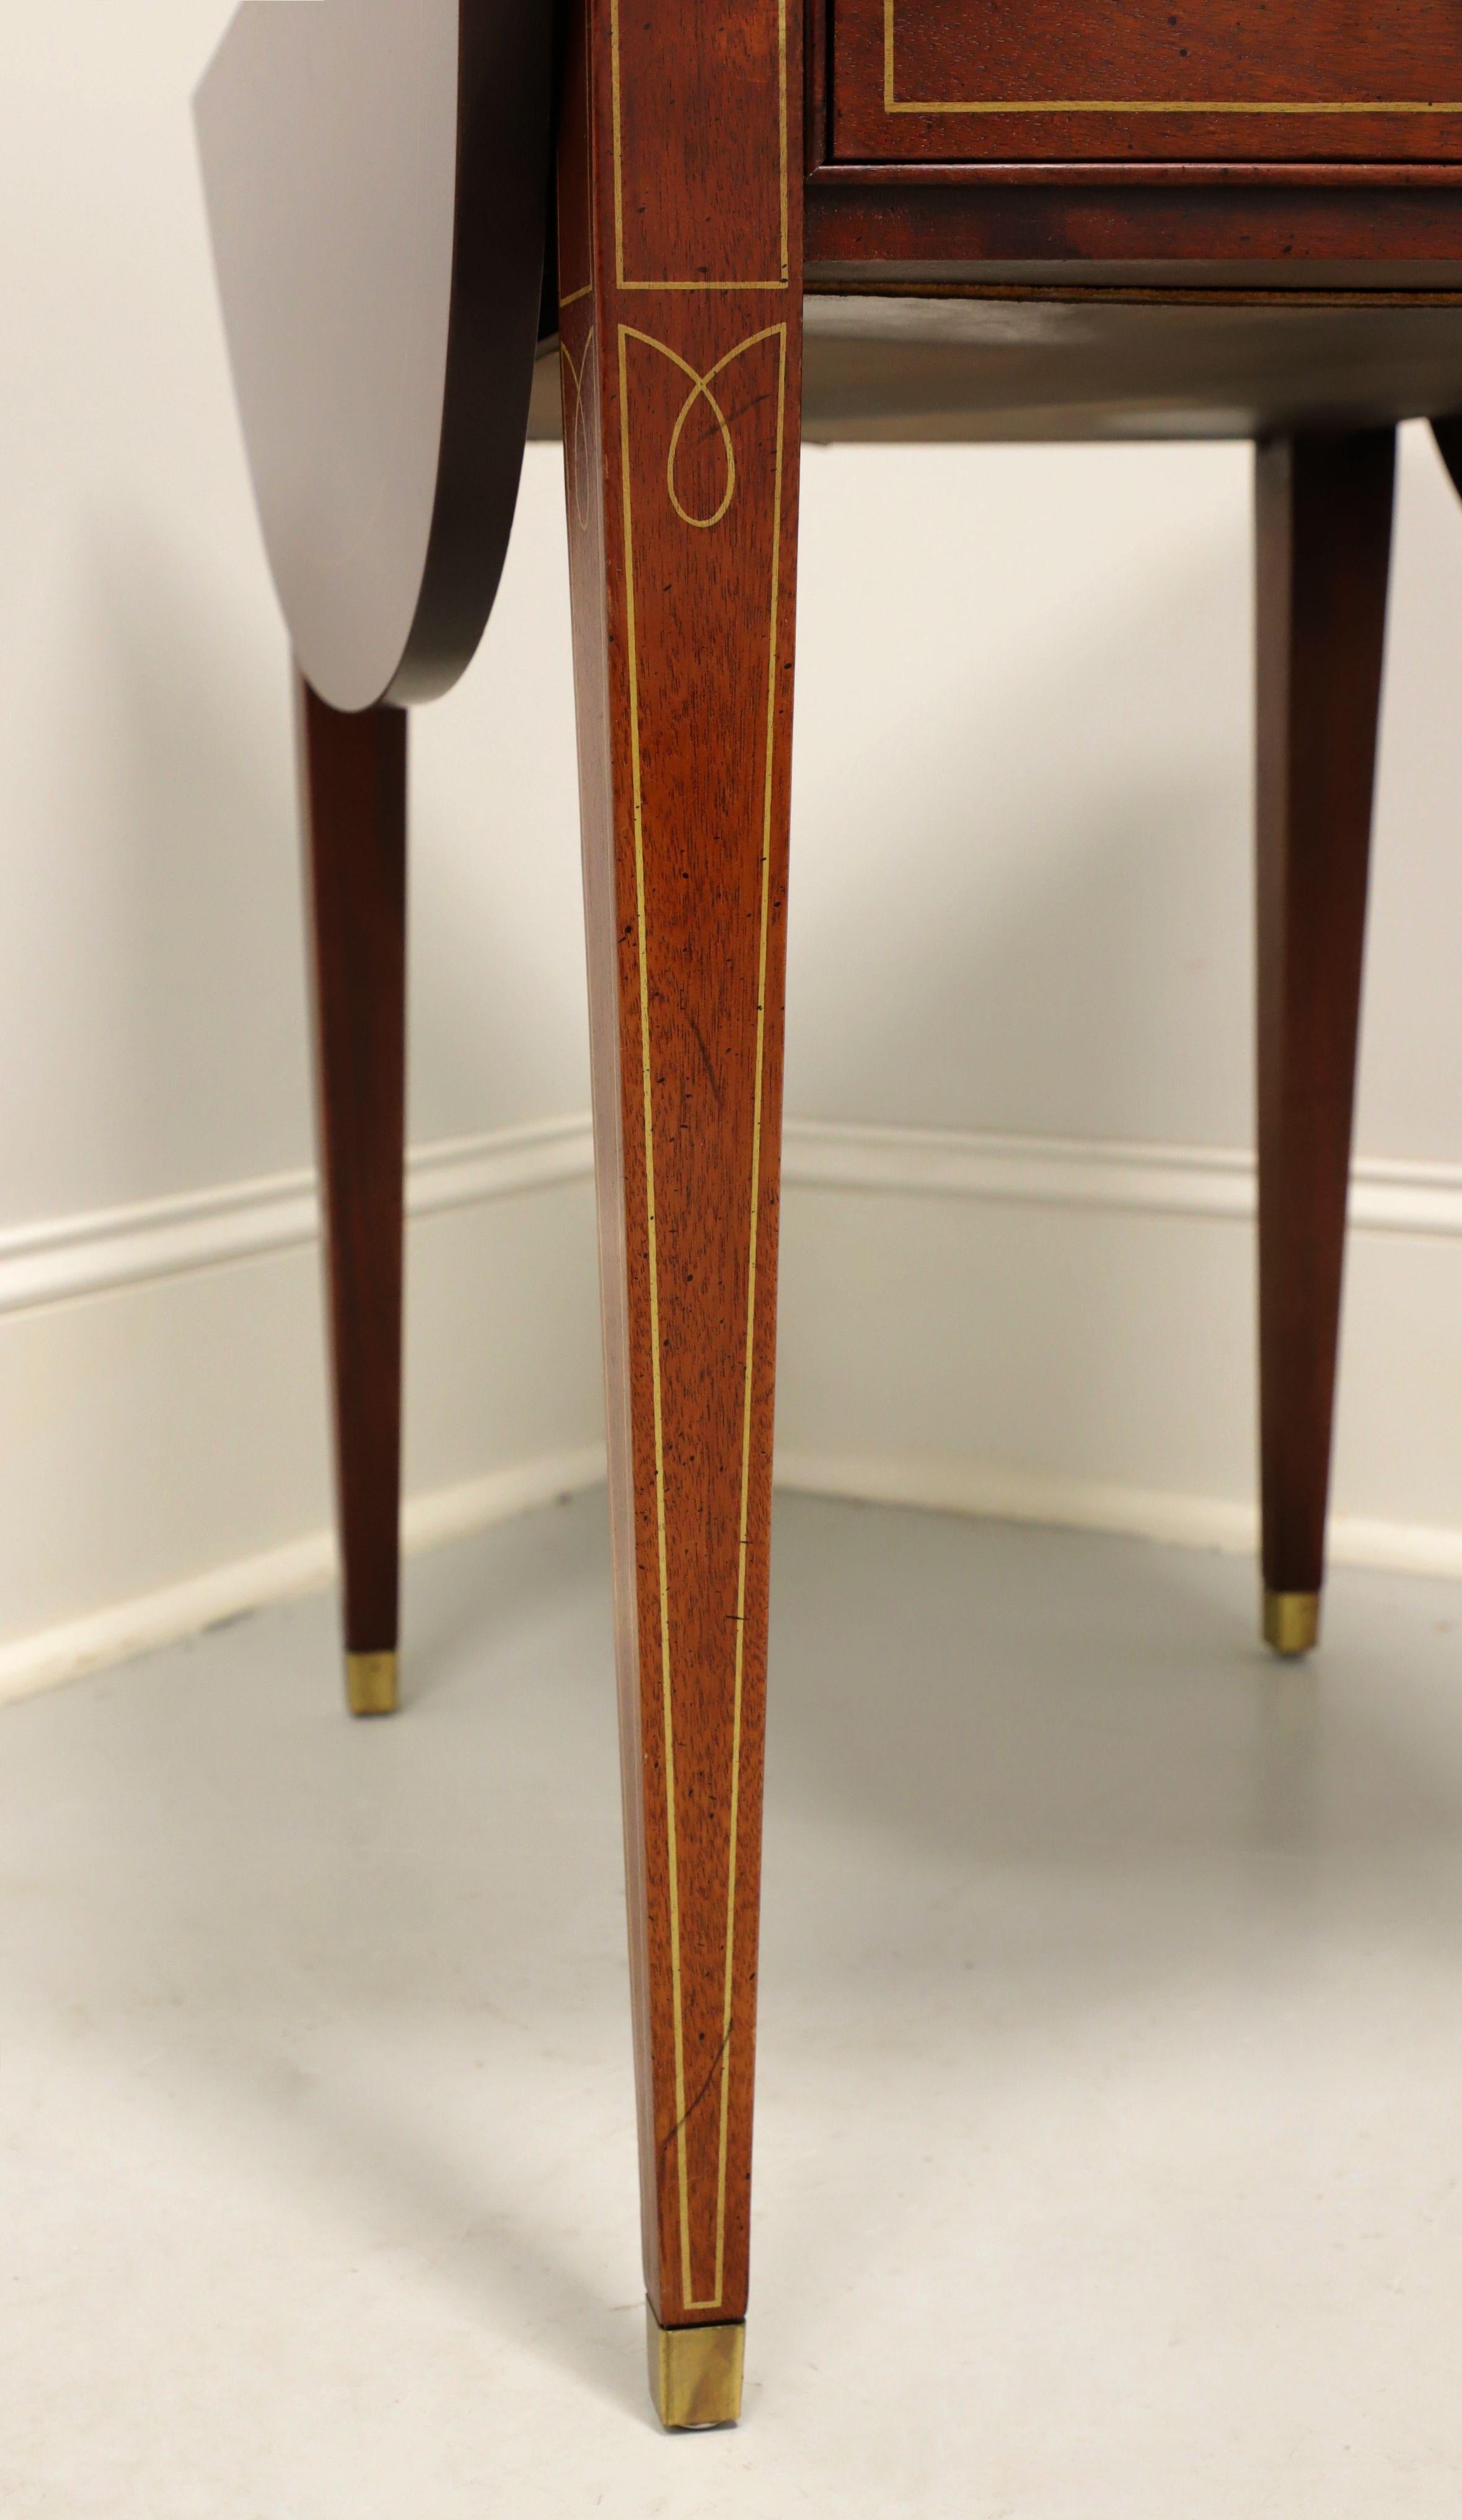 HICKORY CHAIR James River Plantations Mahogany Drop-Leaf Pembroke Table - A In Good Condition In Charlotte, NC